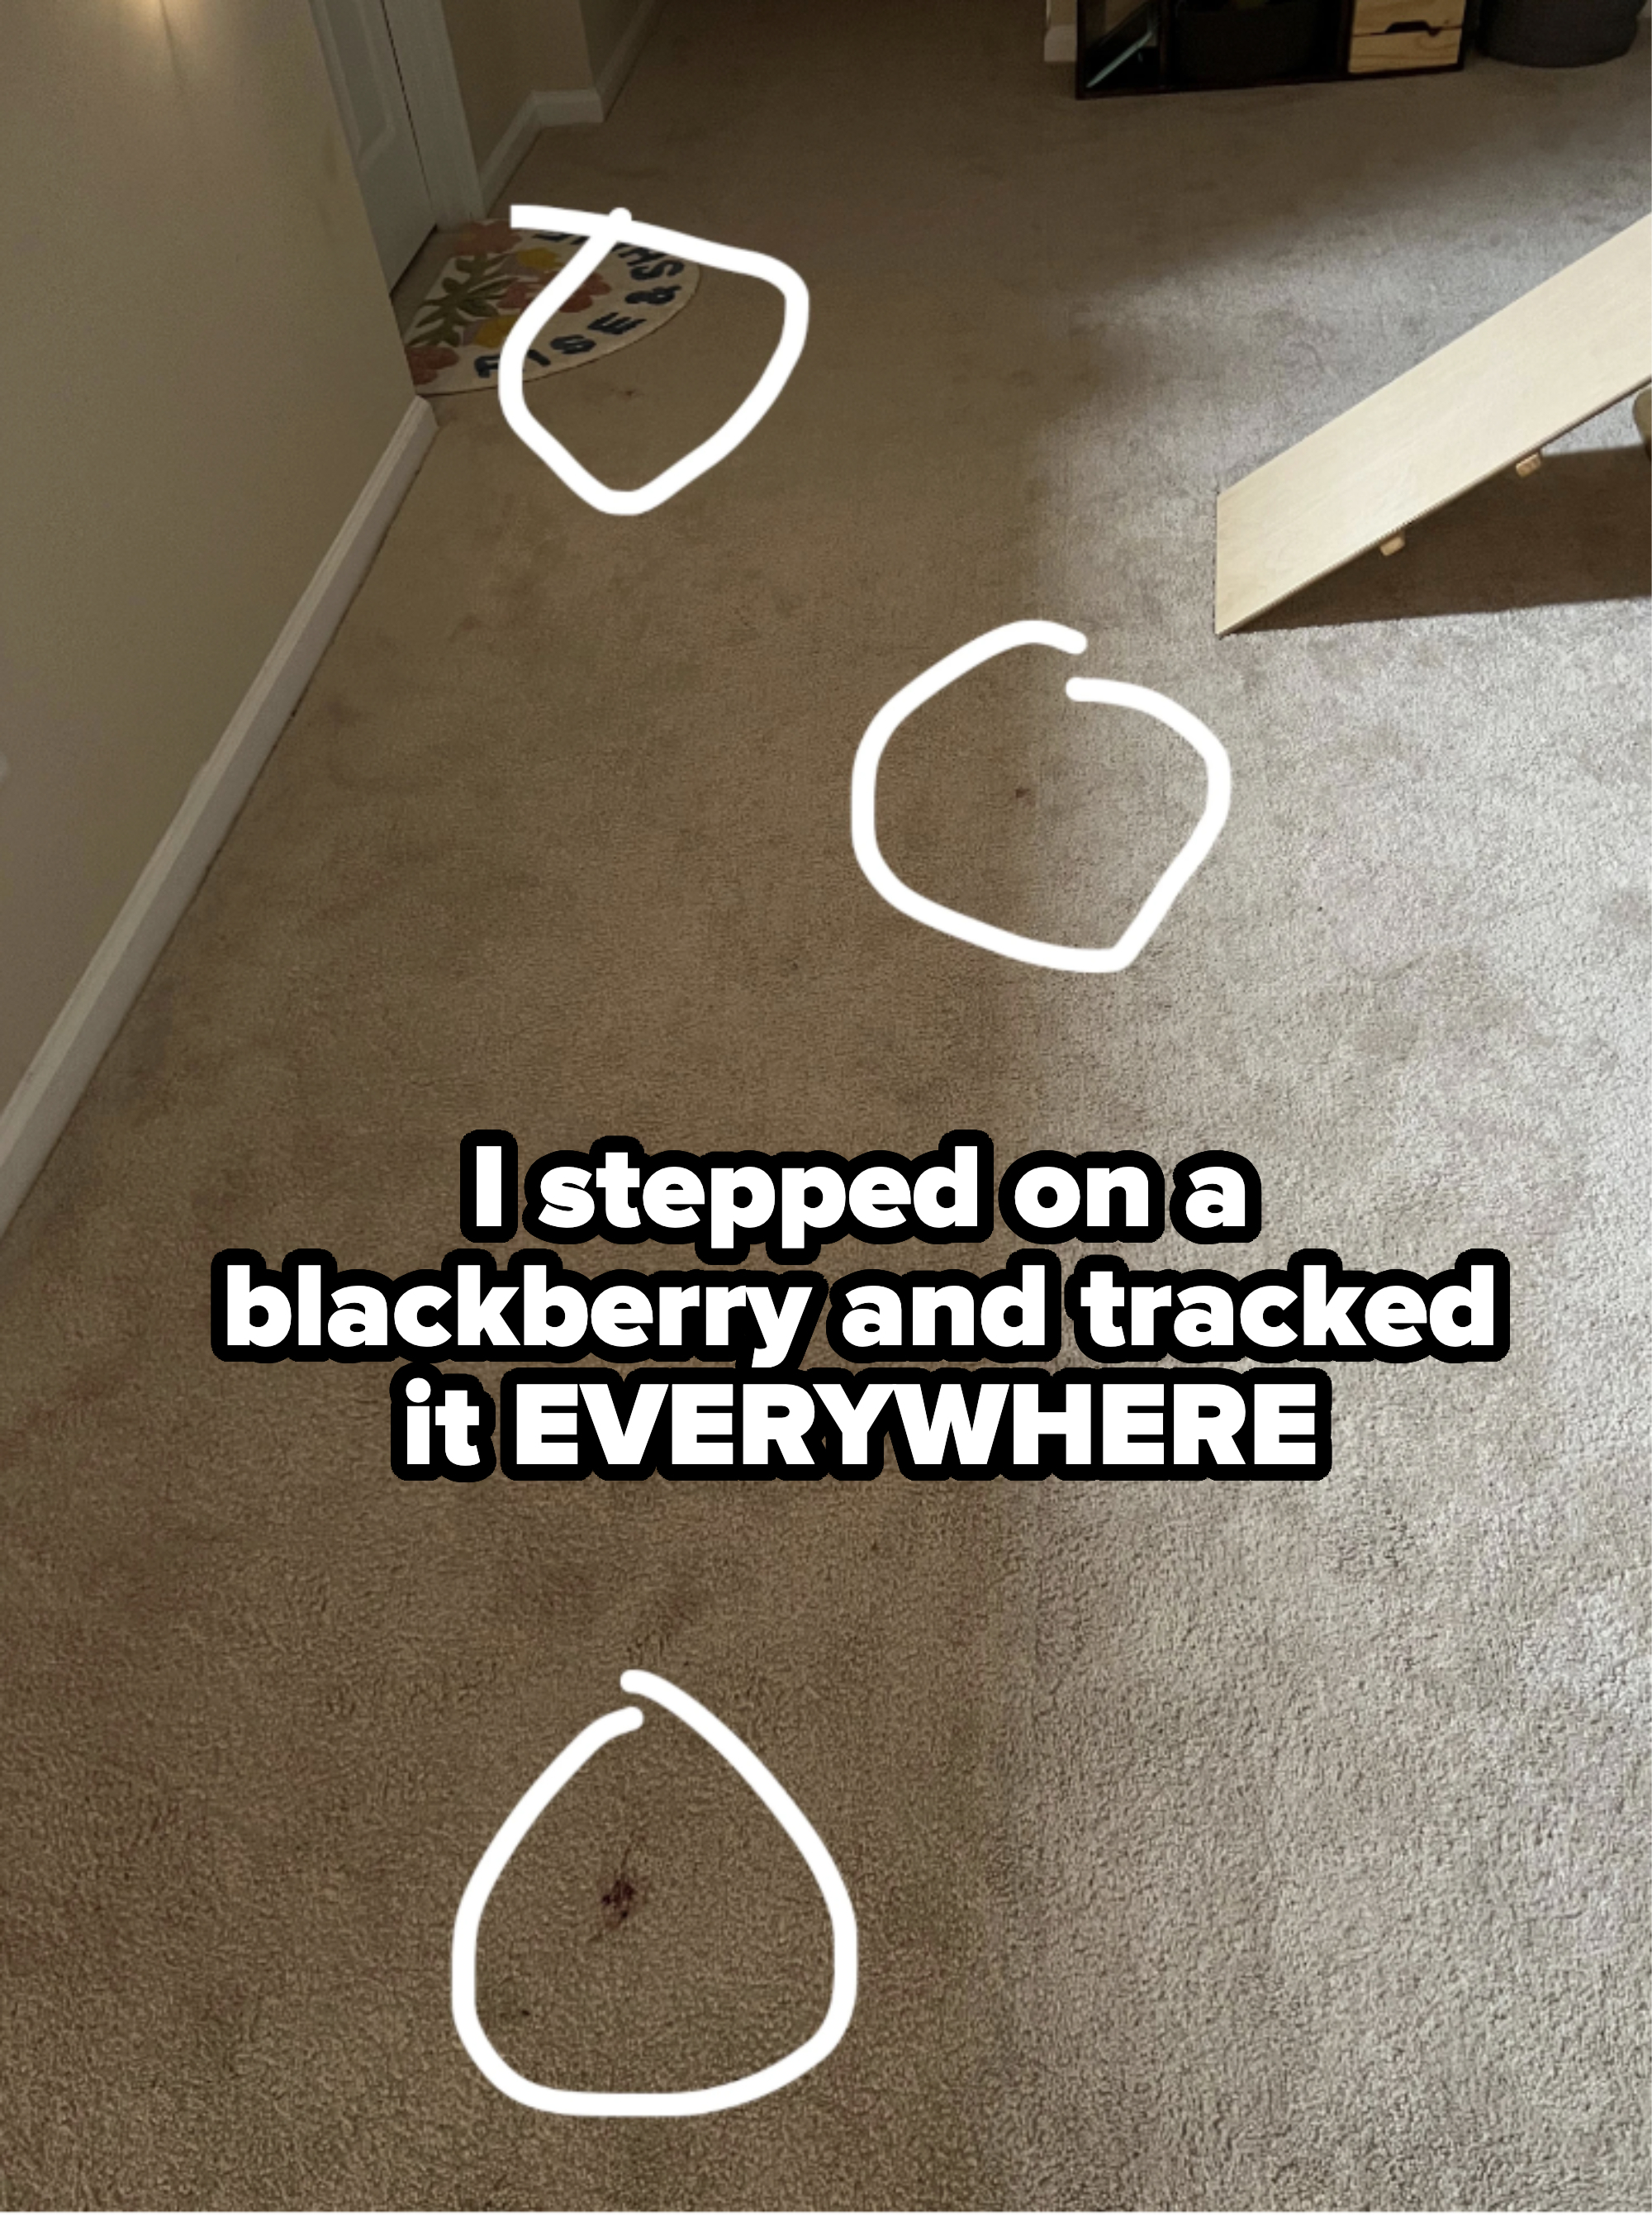 Carpeted floor with circled blackberry stains on it after person stepped on a berry